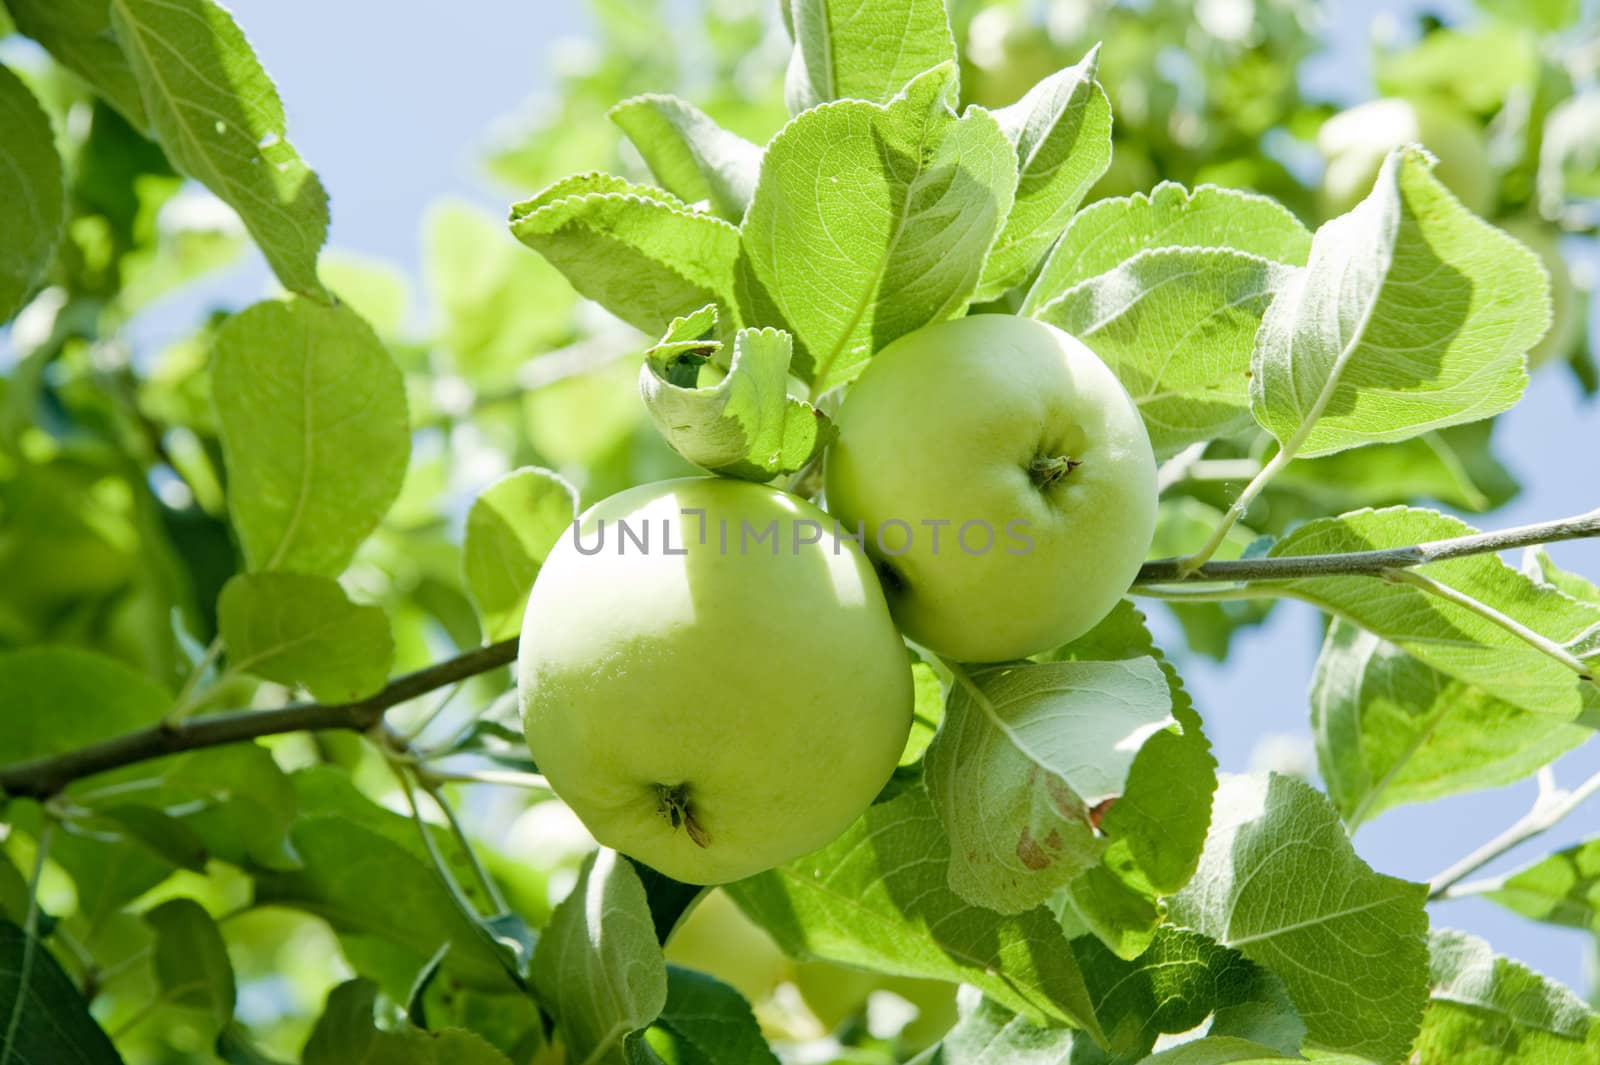 Three green apples on a branch taken as clouse up